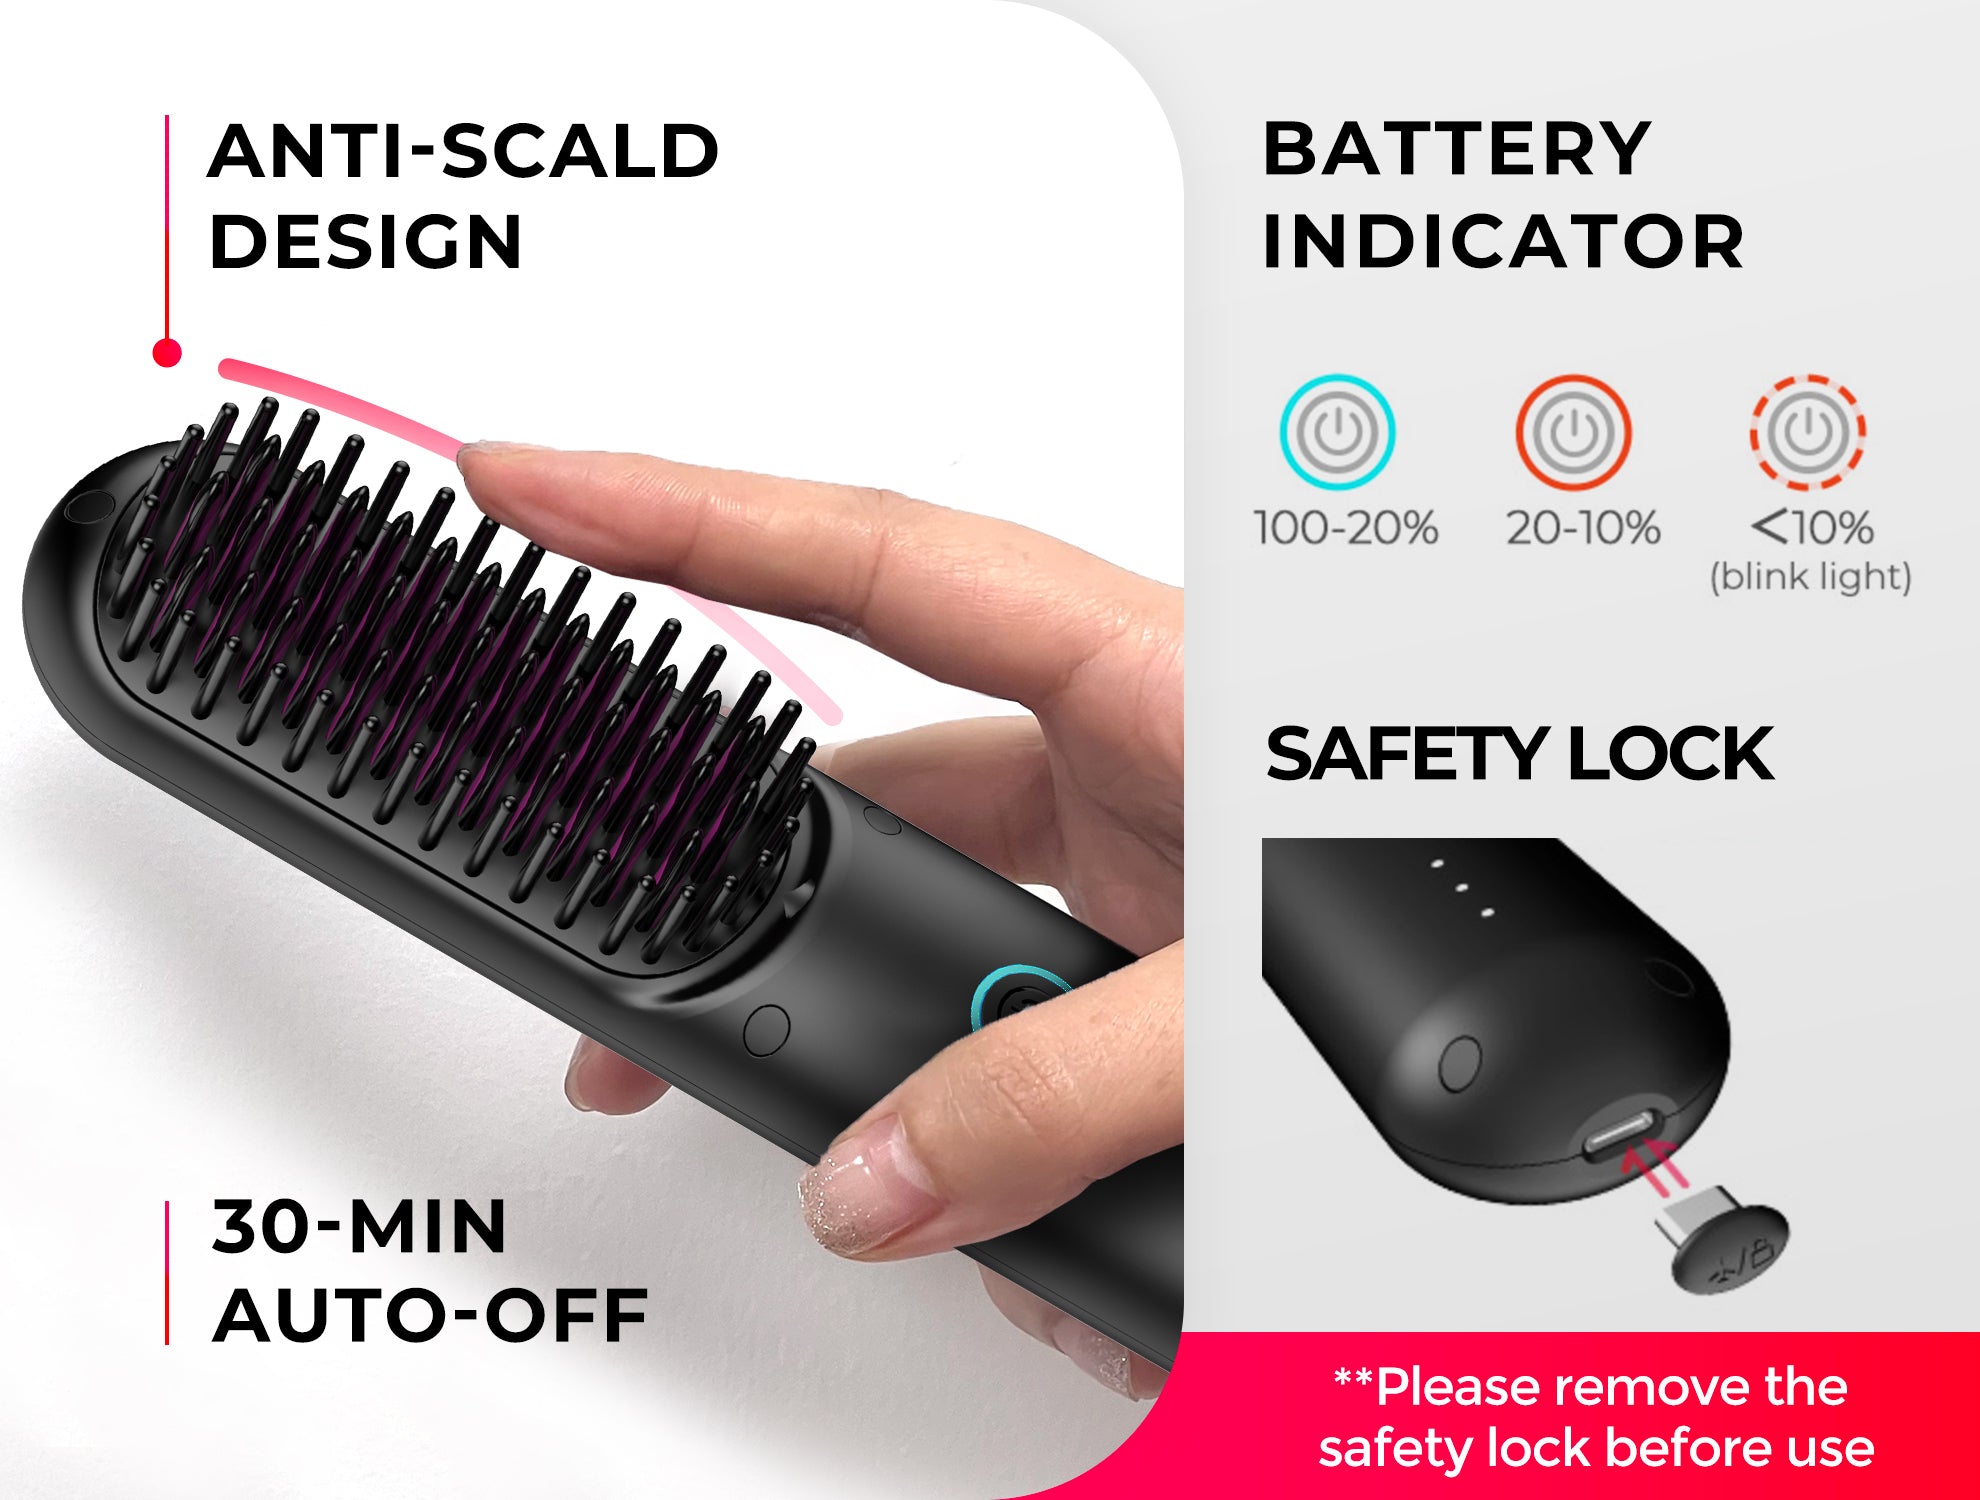 HairMNL - Now's the TYMO to try before you buy! 💯 Want to see TYMO Porta  Portable Hair Straightening Brush and TYMO Volumizer Hot Brush for  yourself? Drop by HairMNL Studio Serendra